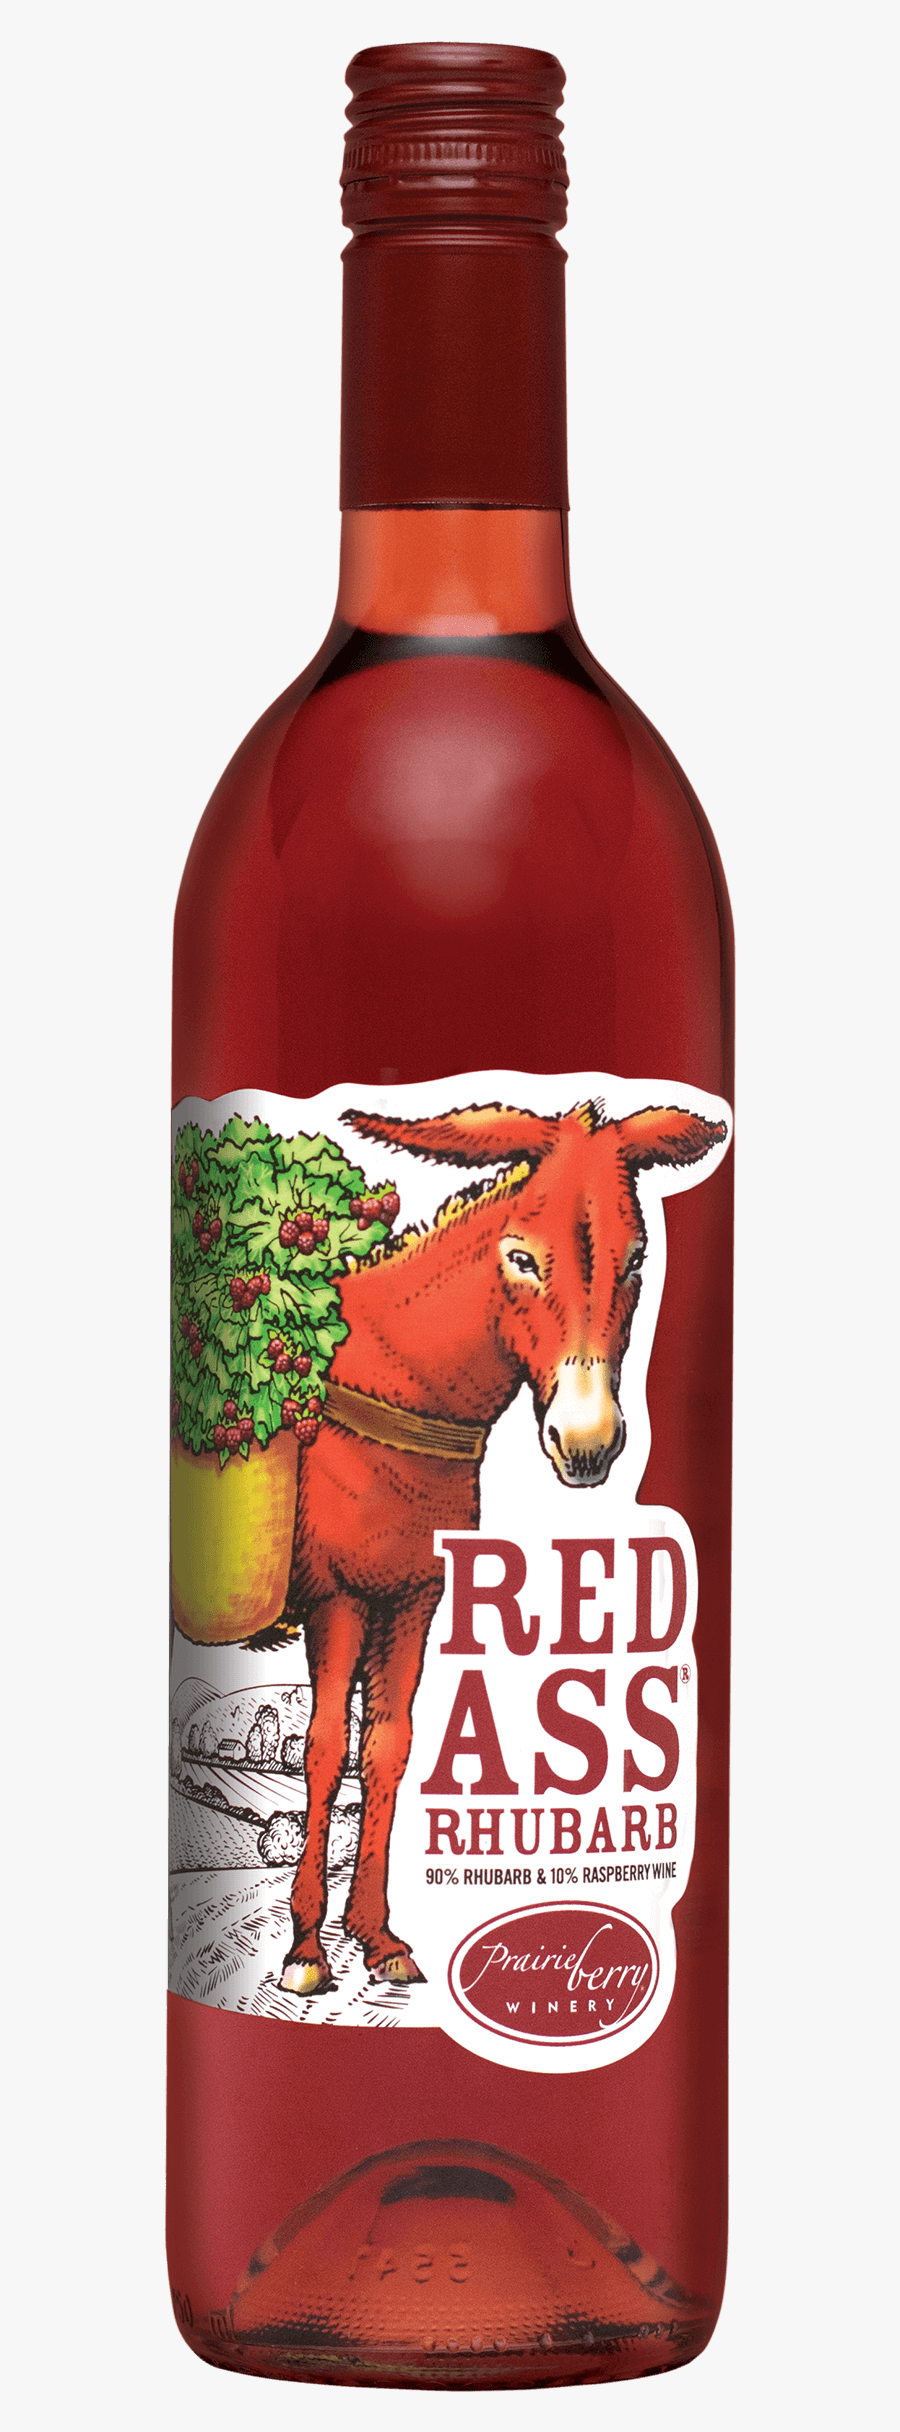 Red Ass Rhubarb Wine, Transparent Clipart